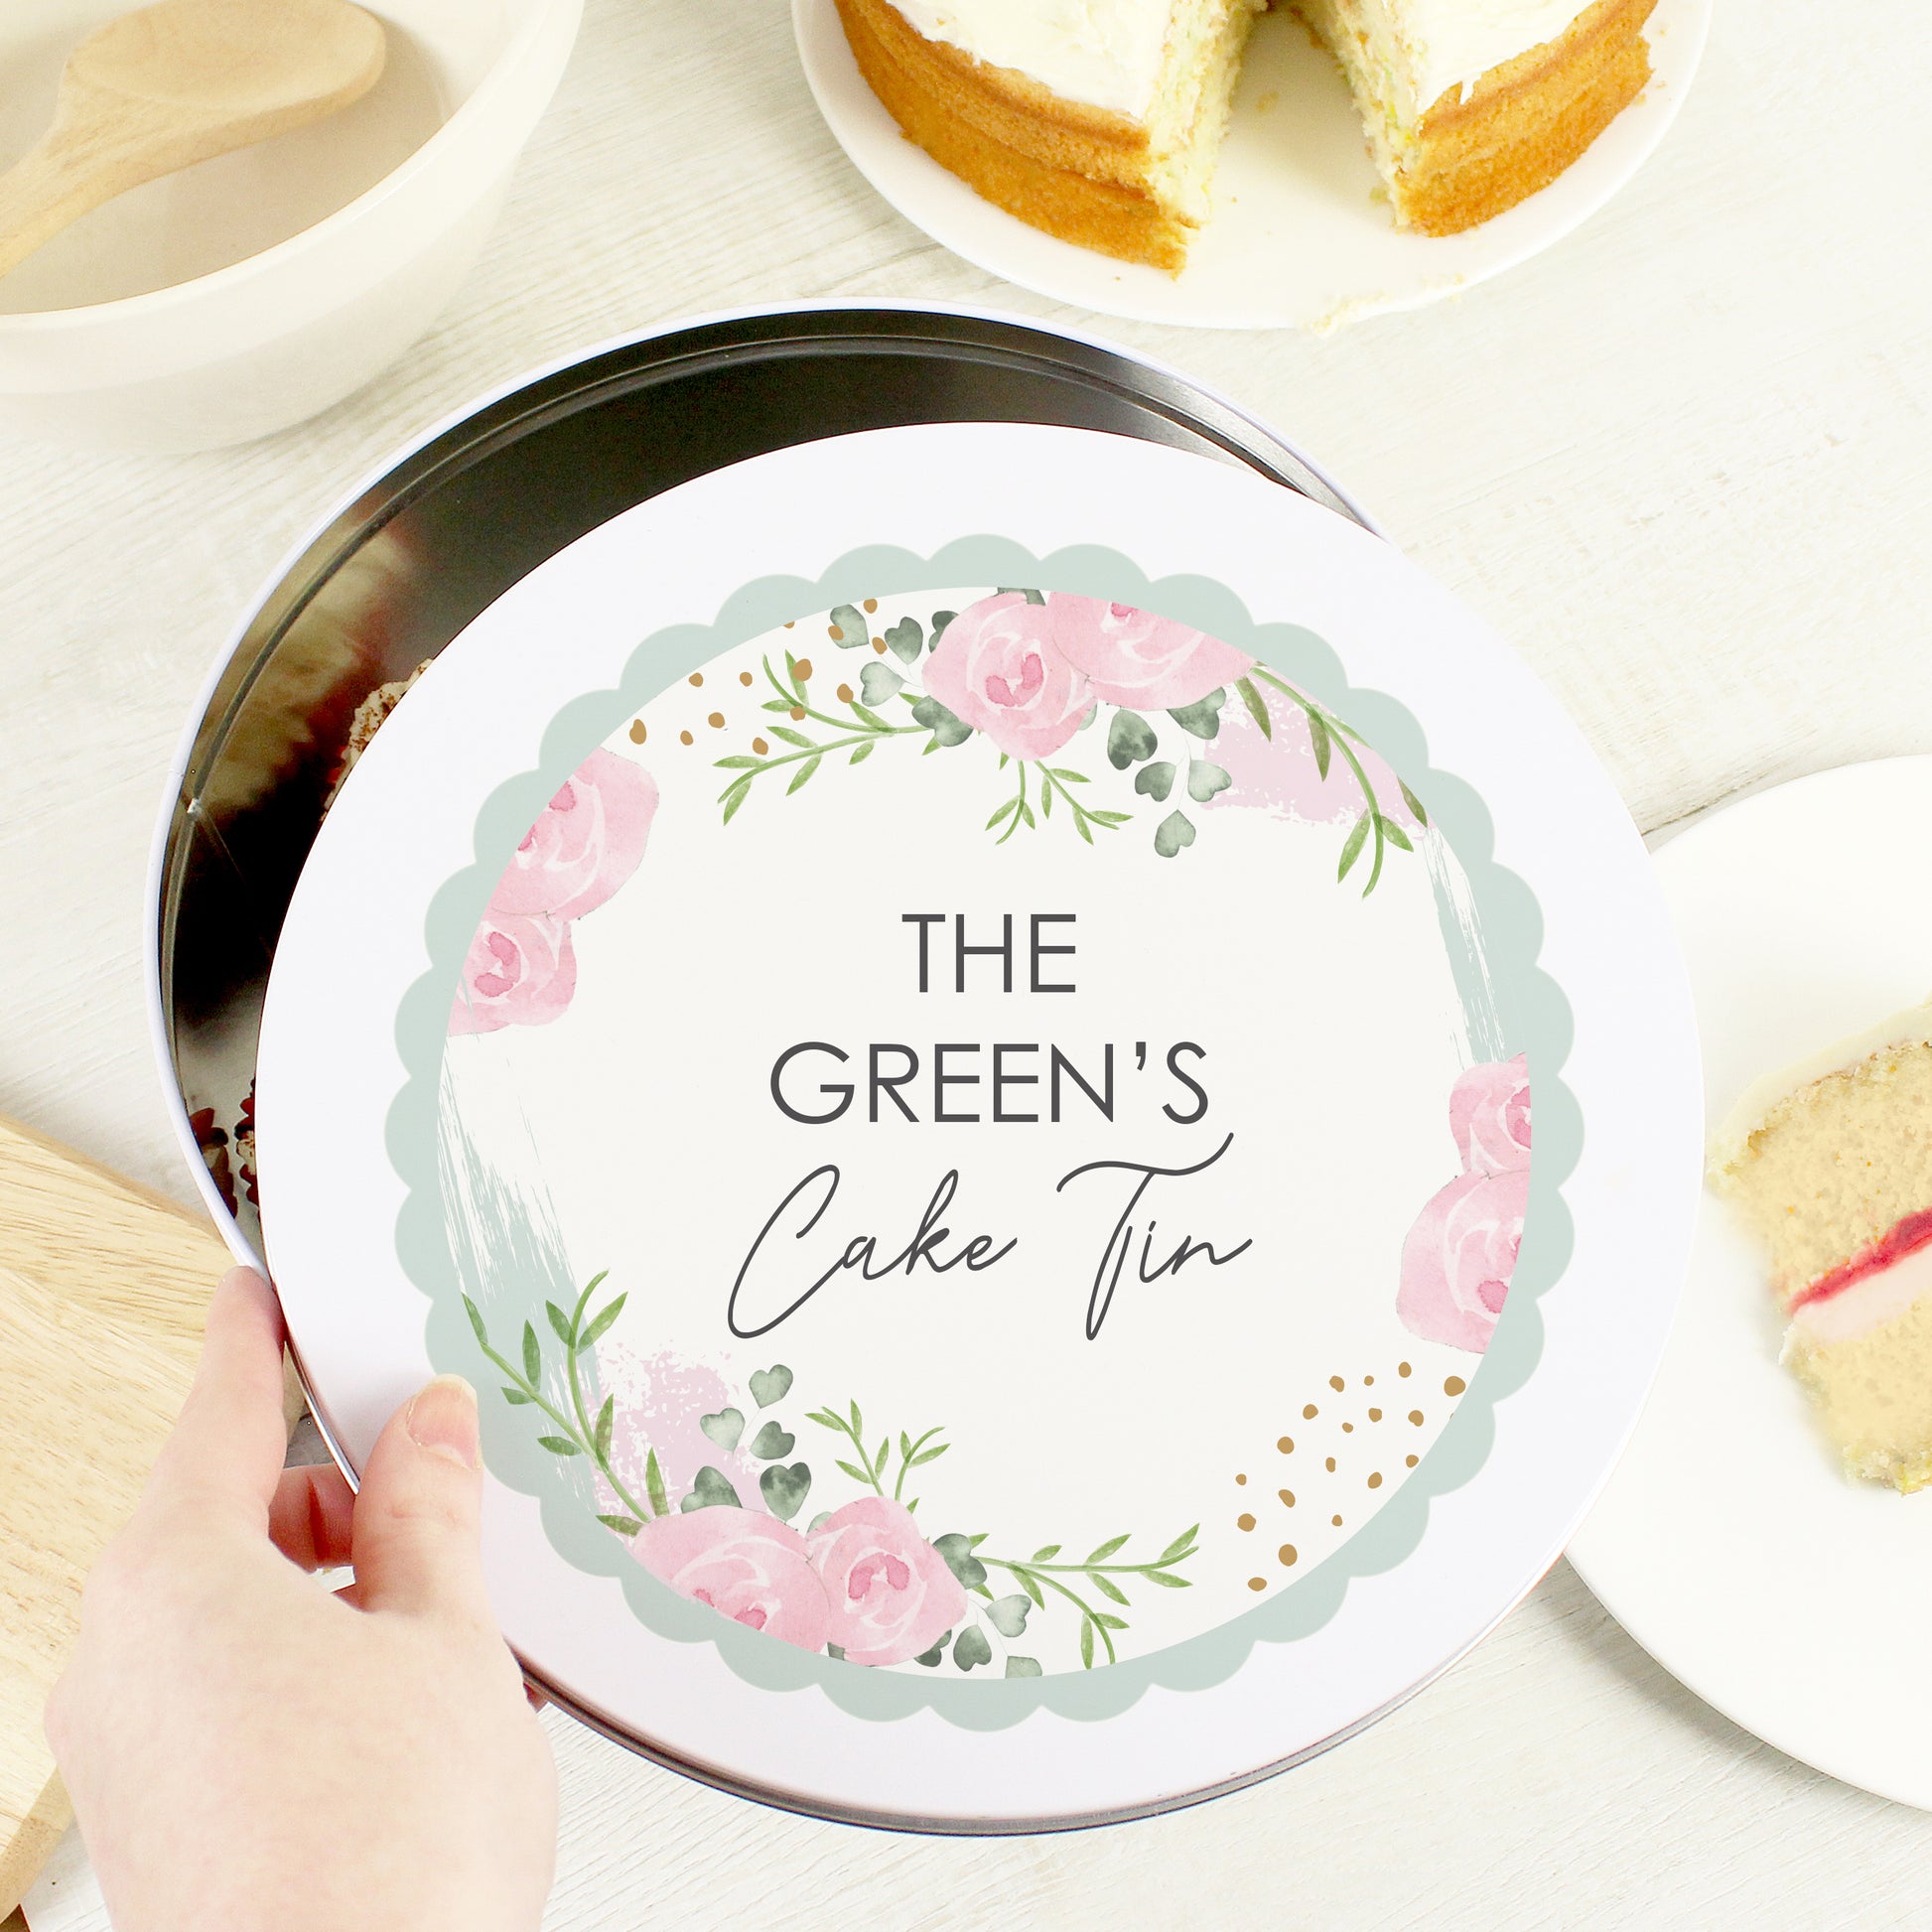 A hand is holding the tin cover of Personalised Floral Cake Tin that says "THE GREEN'S Cake Tin"